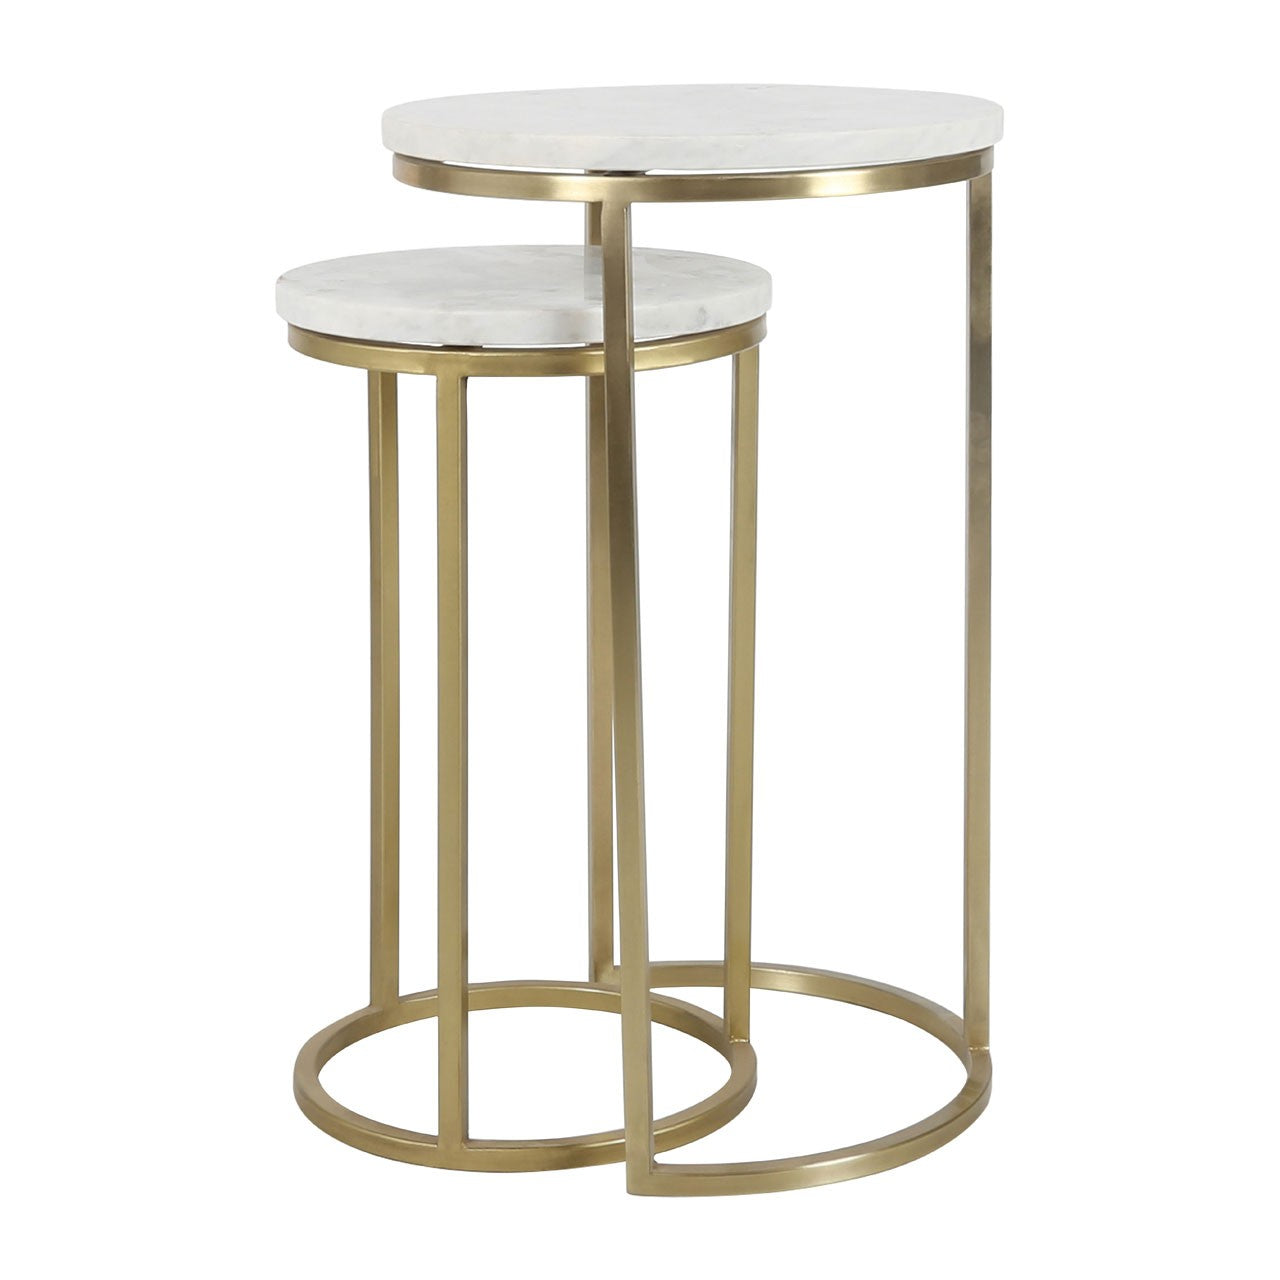 Nirav Nesting Marble Tables - Set of 2 - UNAVAILABLE DUE TO POOR QUALITY-Premier-Olivia's